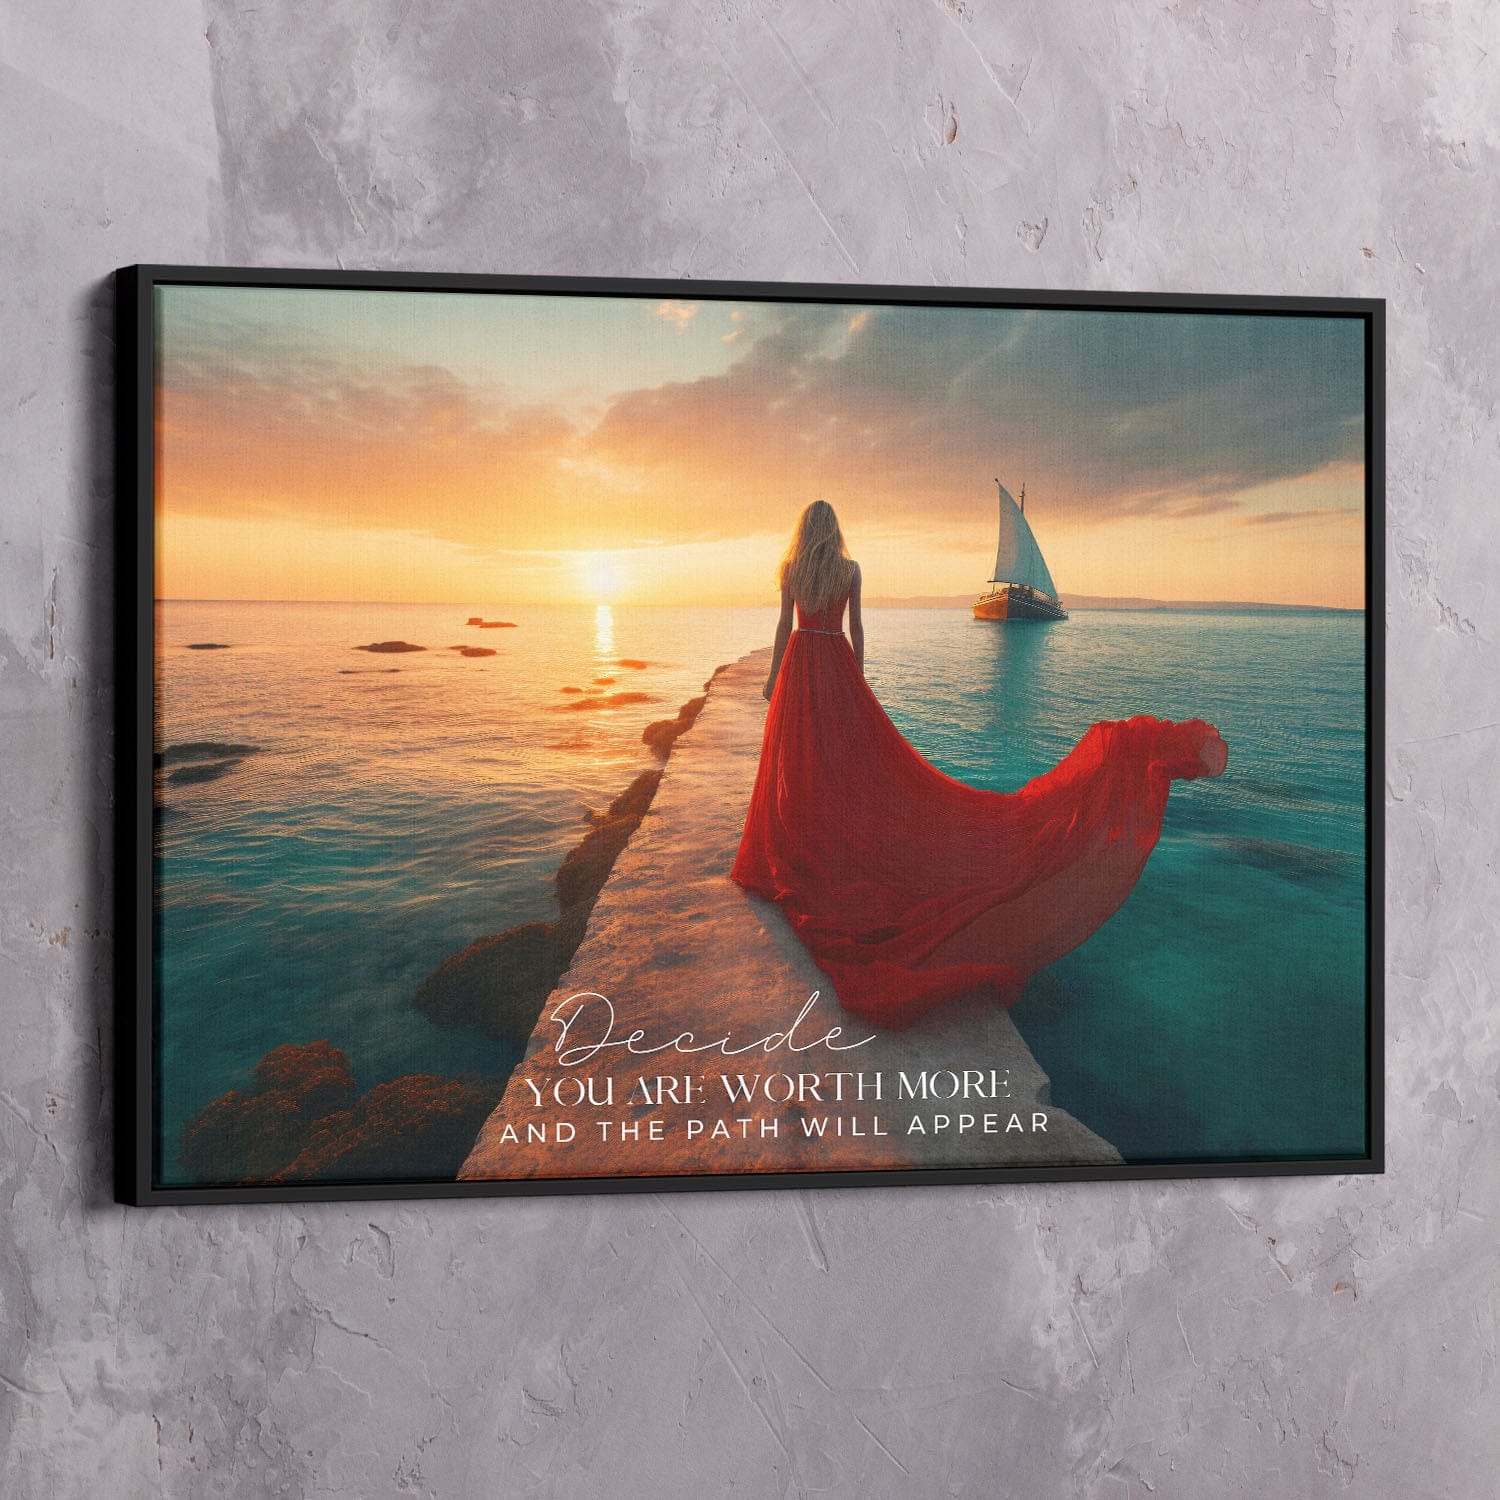 Red Dress Sea - Decide you are worth more Quote Wall Art | Inspirational Wall Art Motivational Wall Art Quotes Office Art | ImpaktMaker Exclusive Canvas Art Landscape